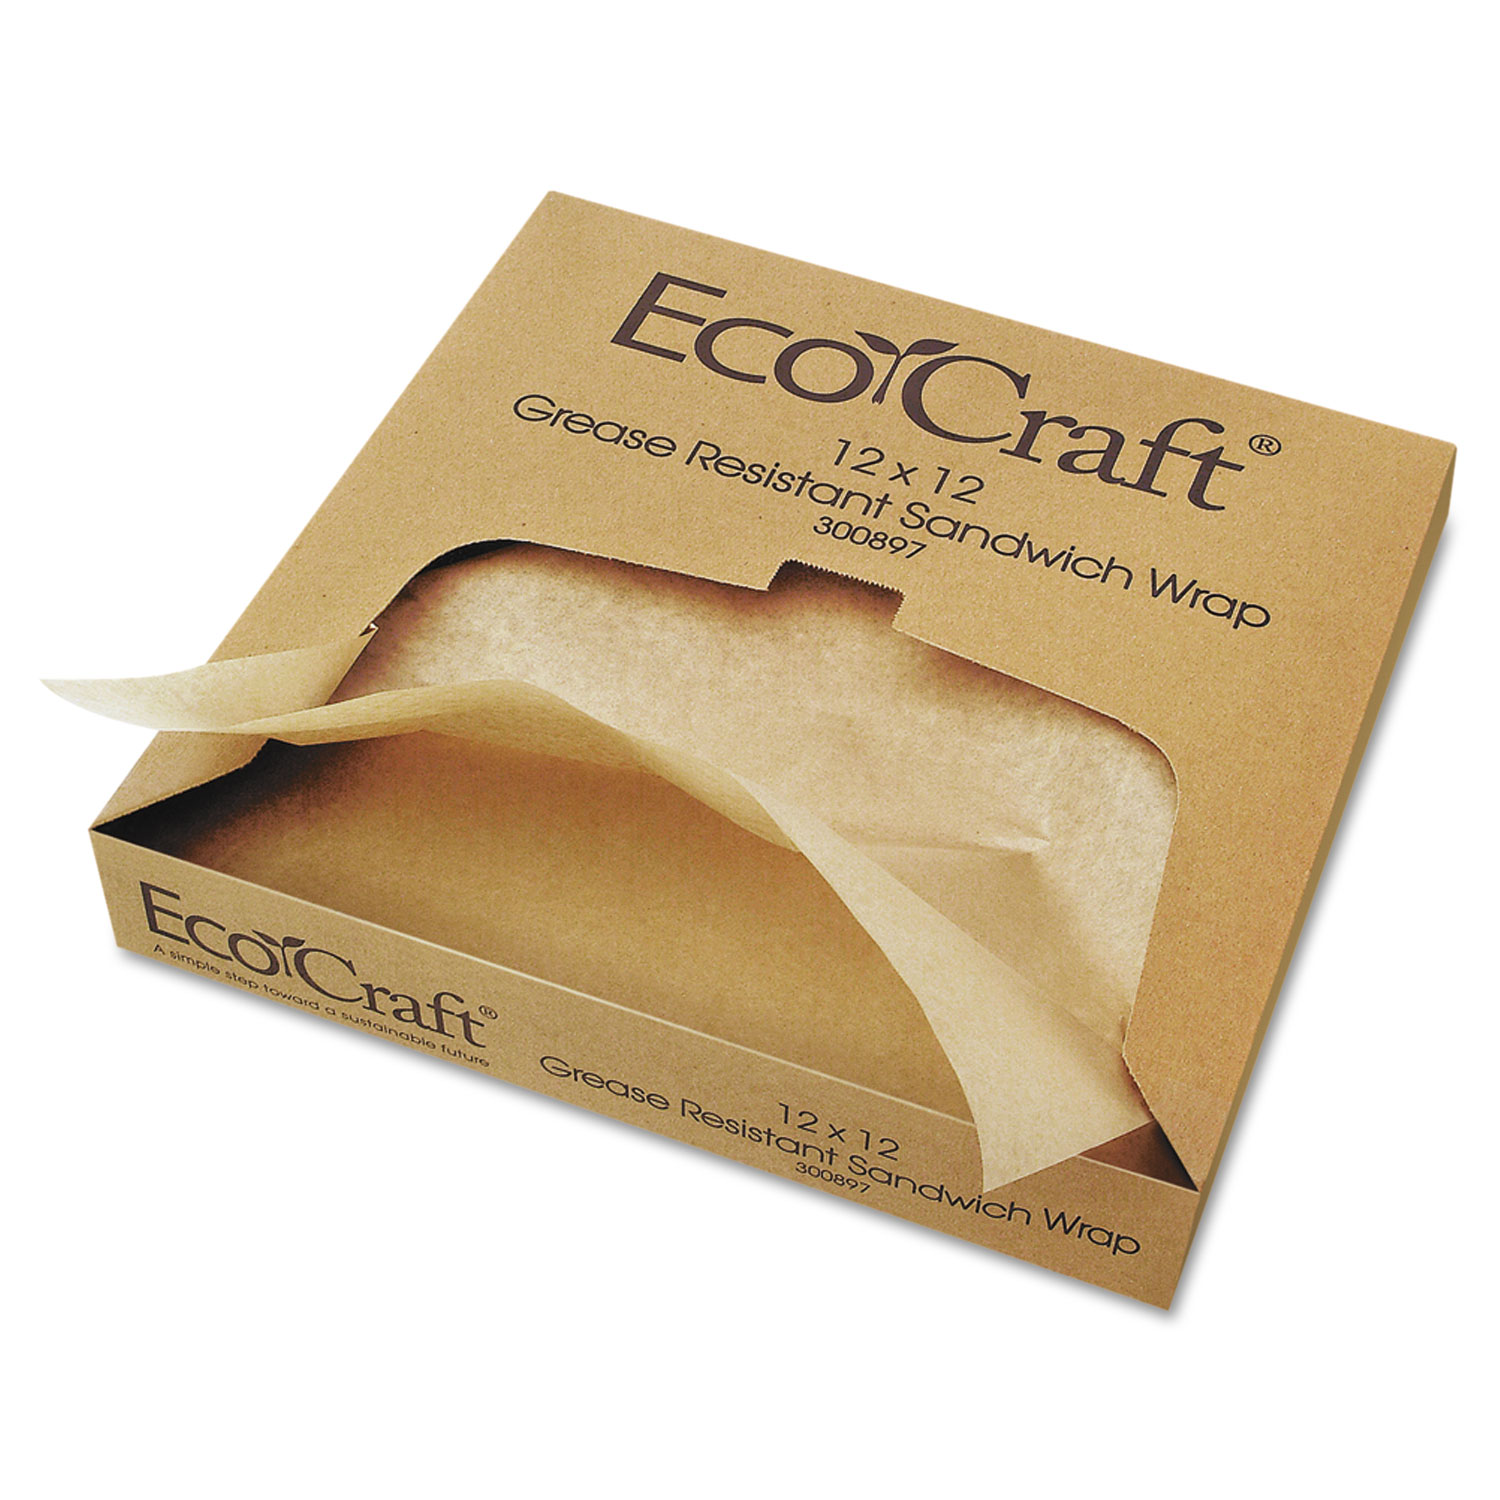 EcoCraft Grease-Resistant Paper Wrap/Liner, 12 x 12, 1000/Box, 5 Boxes/Carton